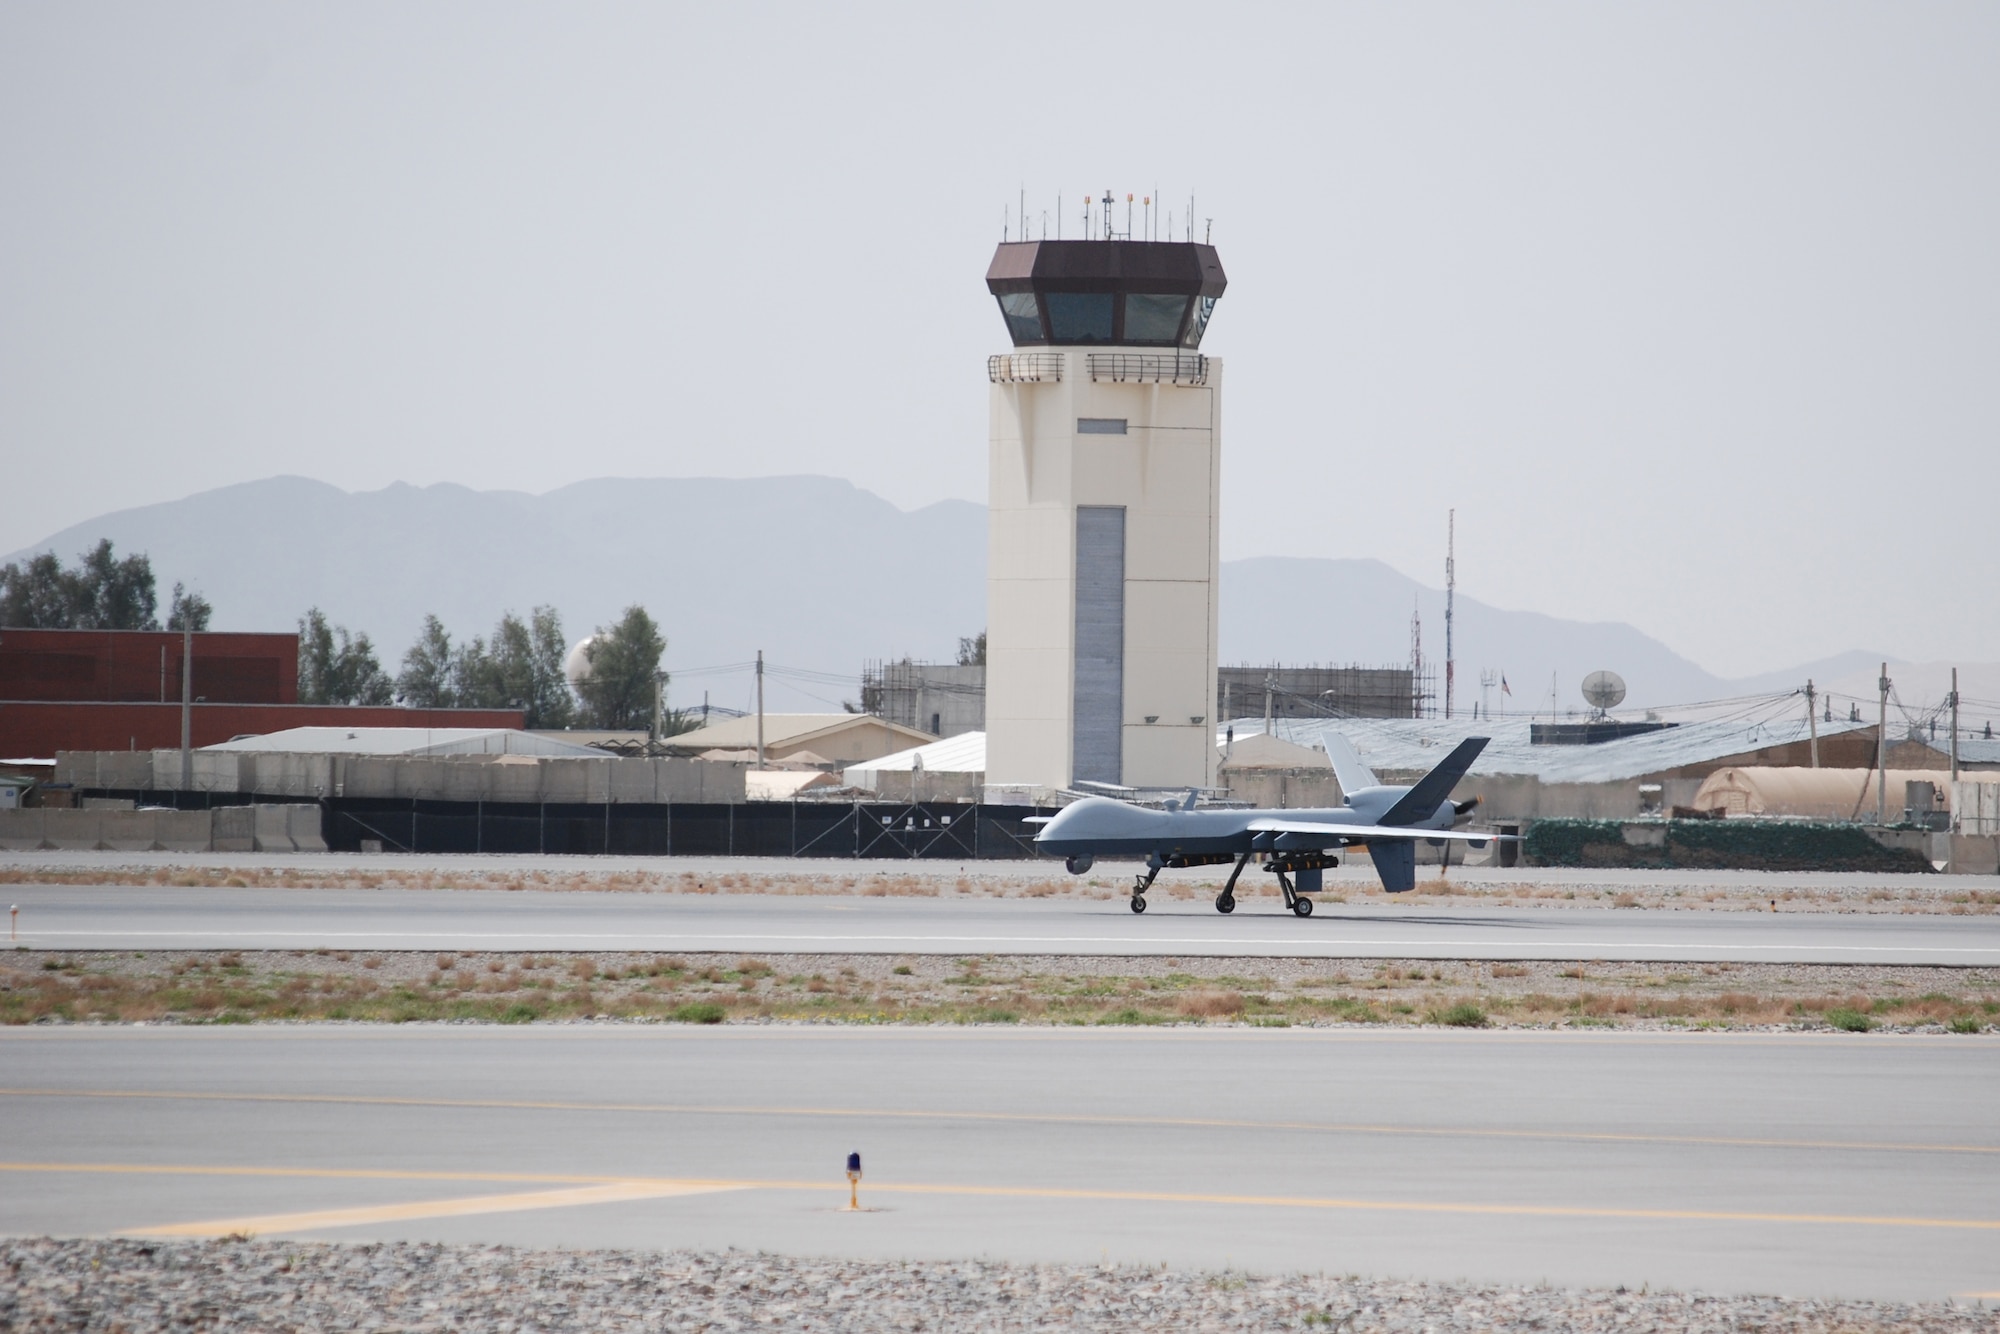 An MQ-9 Reaper taxis after landing at Kandahar Airfield, March 20, 2014. The MQ-9 is assigned to and operated by the 451st Air Expeditionary Group. (U.S. Air Force photo by Capt. Brian Wagner/Released) (A section of the MQ-9 was blurred for operational security reasons.)